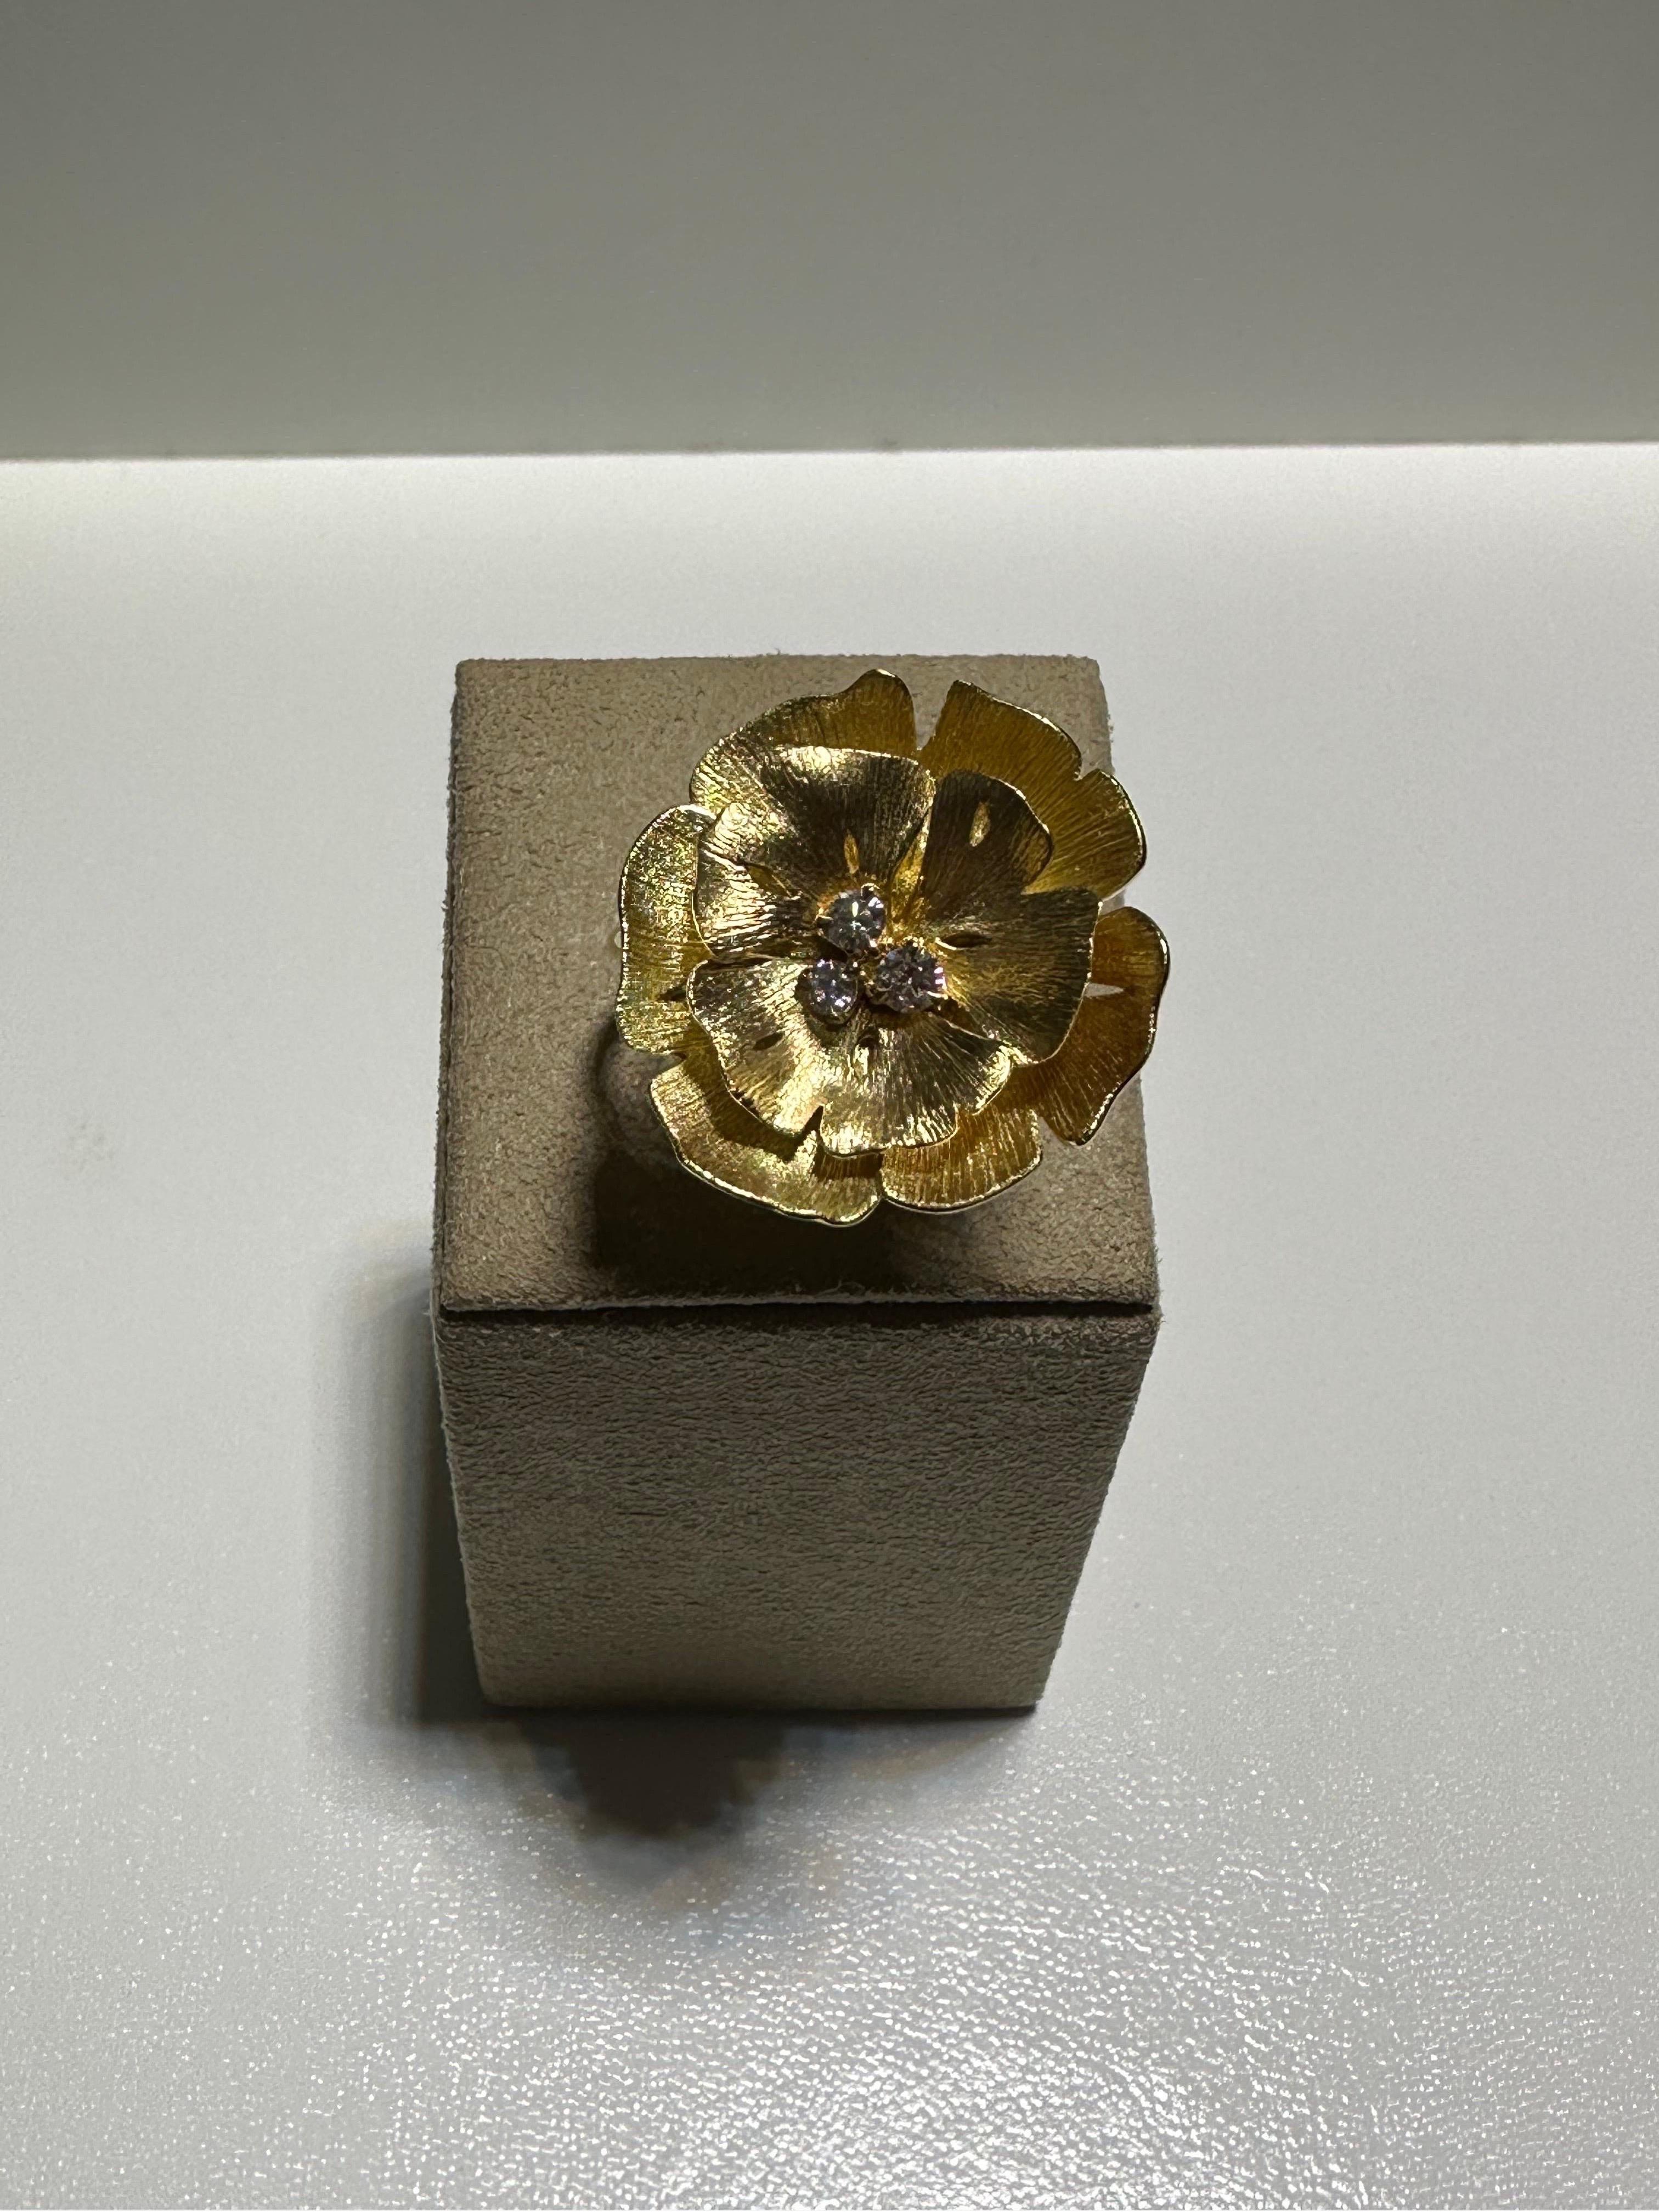 Brand new ring made the French jewelry house Vever. The ring is made of 18 kt yellowgold and has 3 labgrown diamonds (0.23 ct). 

The starts in 1821 in Metz, France, when Pierre-Paul Vever opens his first silversmith & jewelry workshop. In the